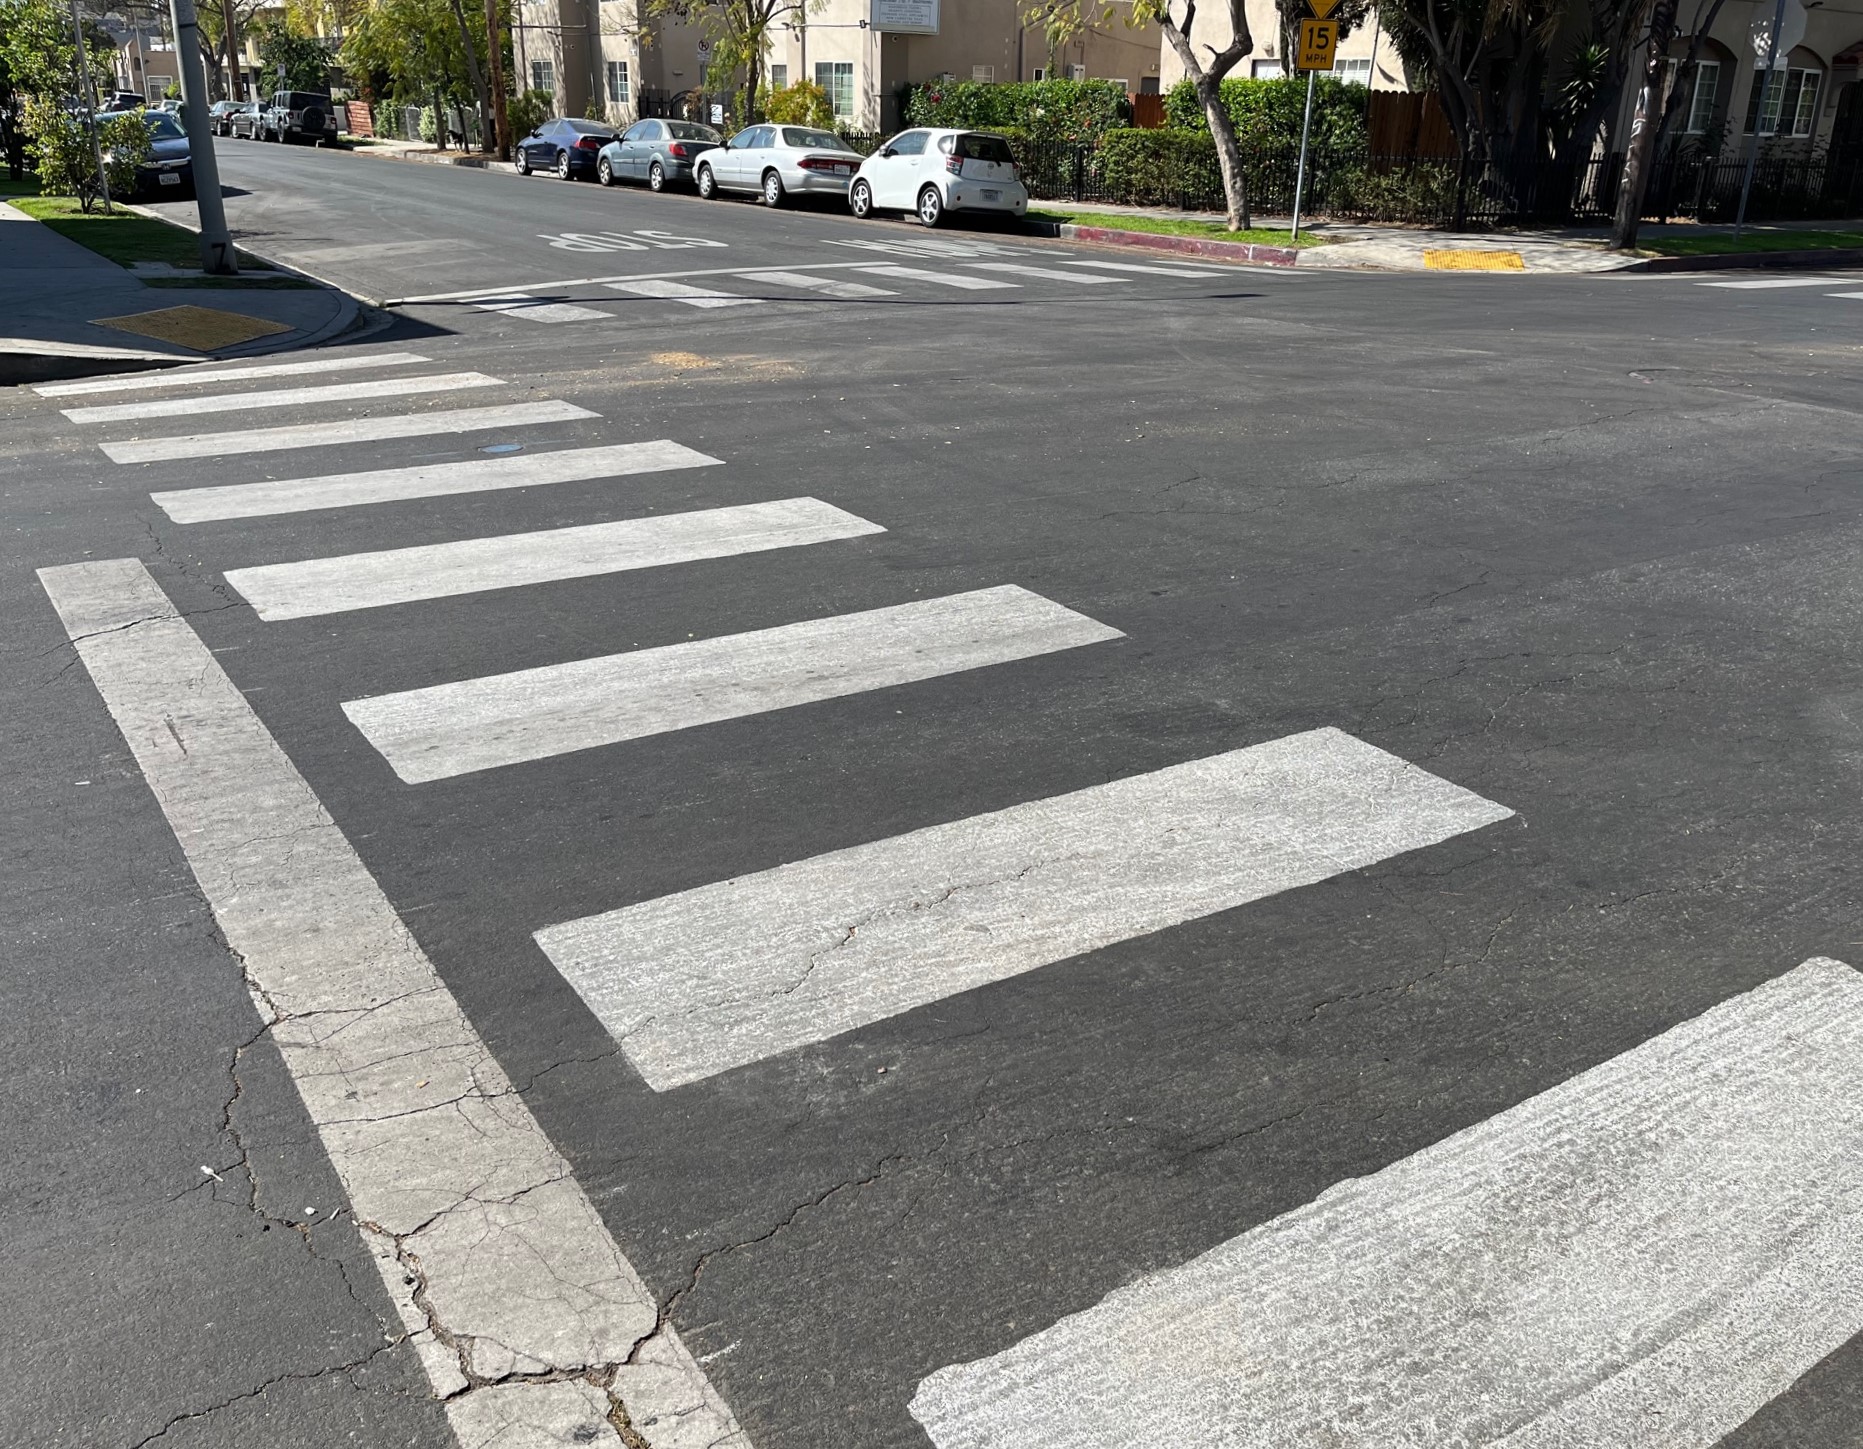 Angelenos Are Taking Street Safety Into Their Own Hands With DIY